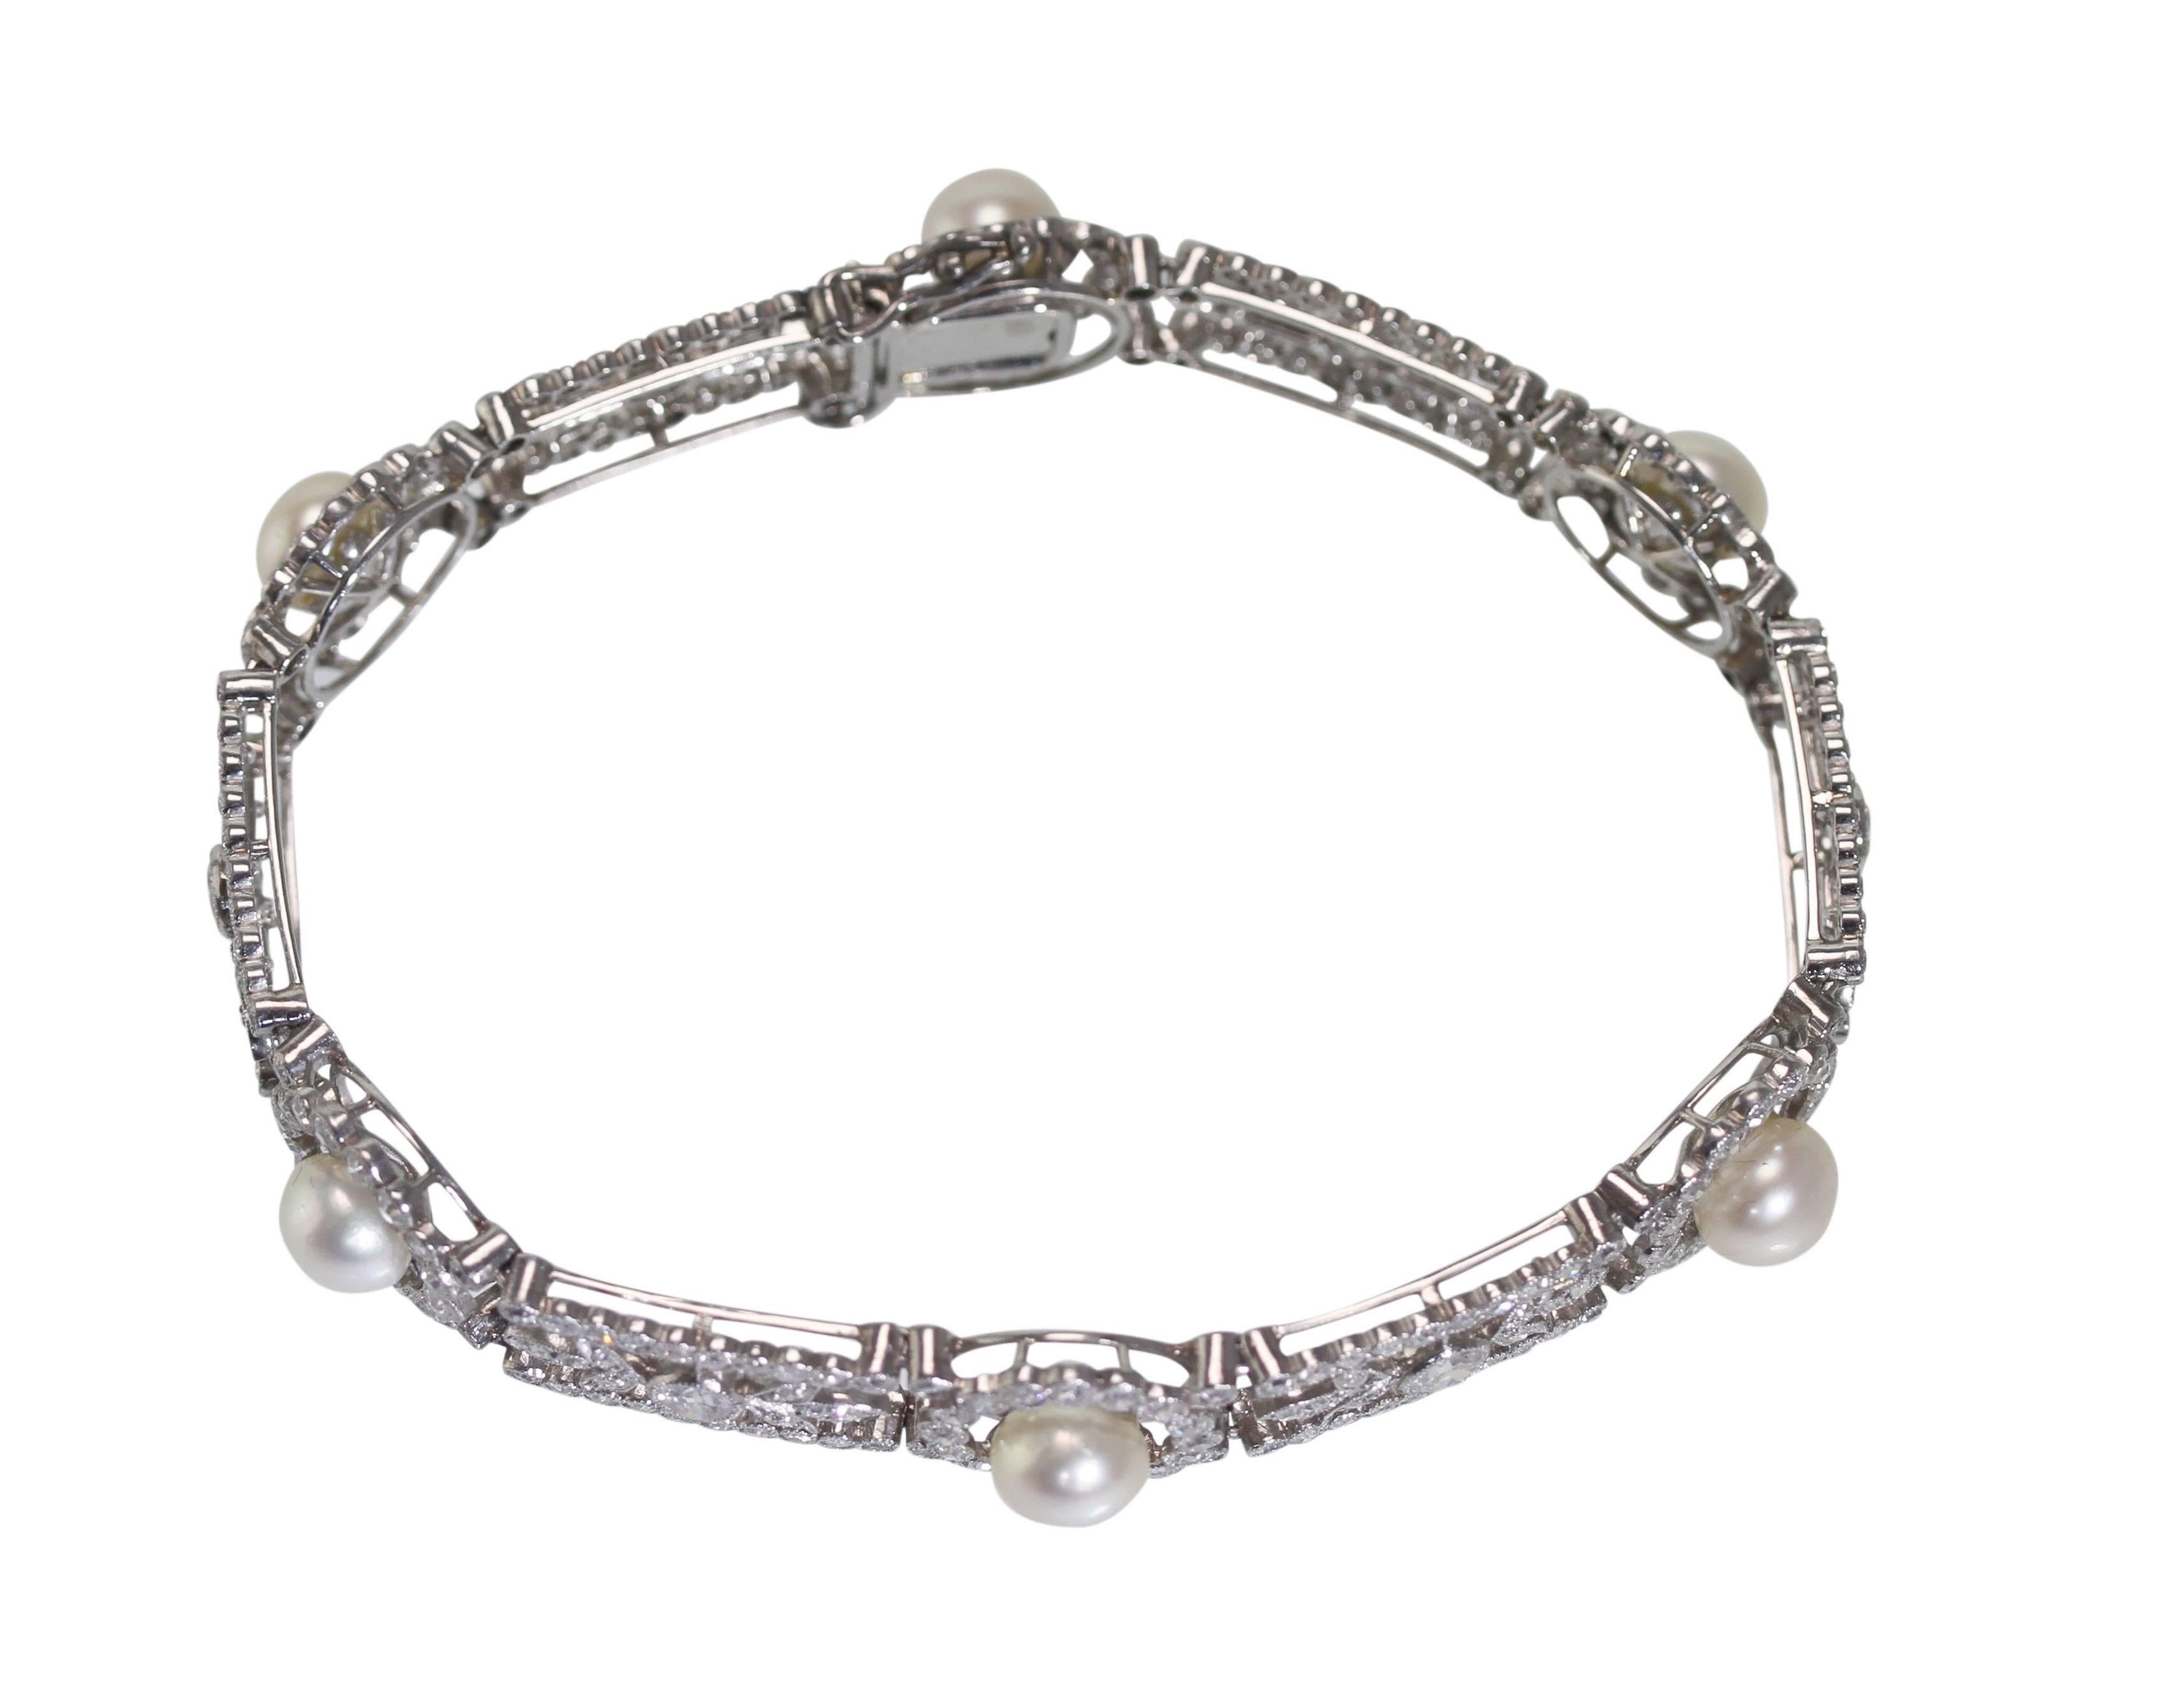 A Belle Epoque platinum, natural pearl and diamond bracelet, France, of openwork foliate design set with 6 natural pearls measuring approximately 6.5 to 6.8 mm., further set throughout 6 old European-cut diamonds weighing approximately 1.25 carats,